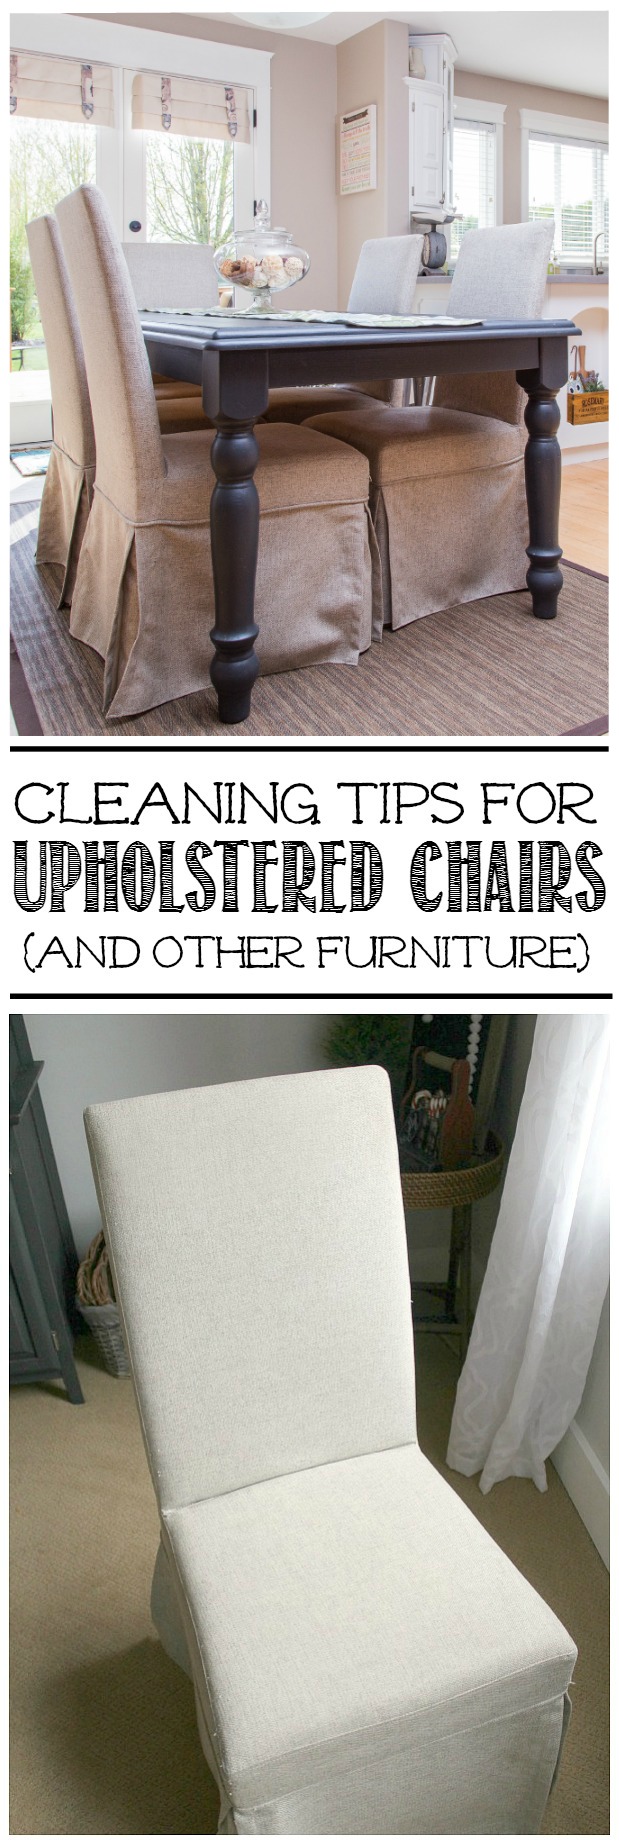 How To Clean Upholstered Chairs, How To Clean White Dining Room Chair Cushions